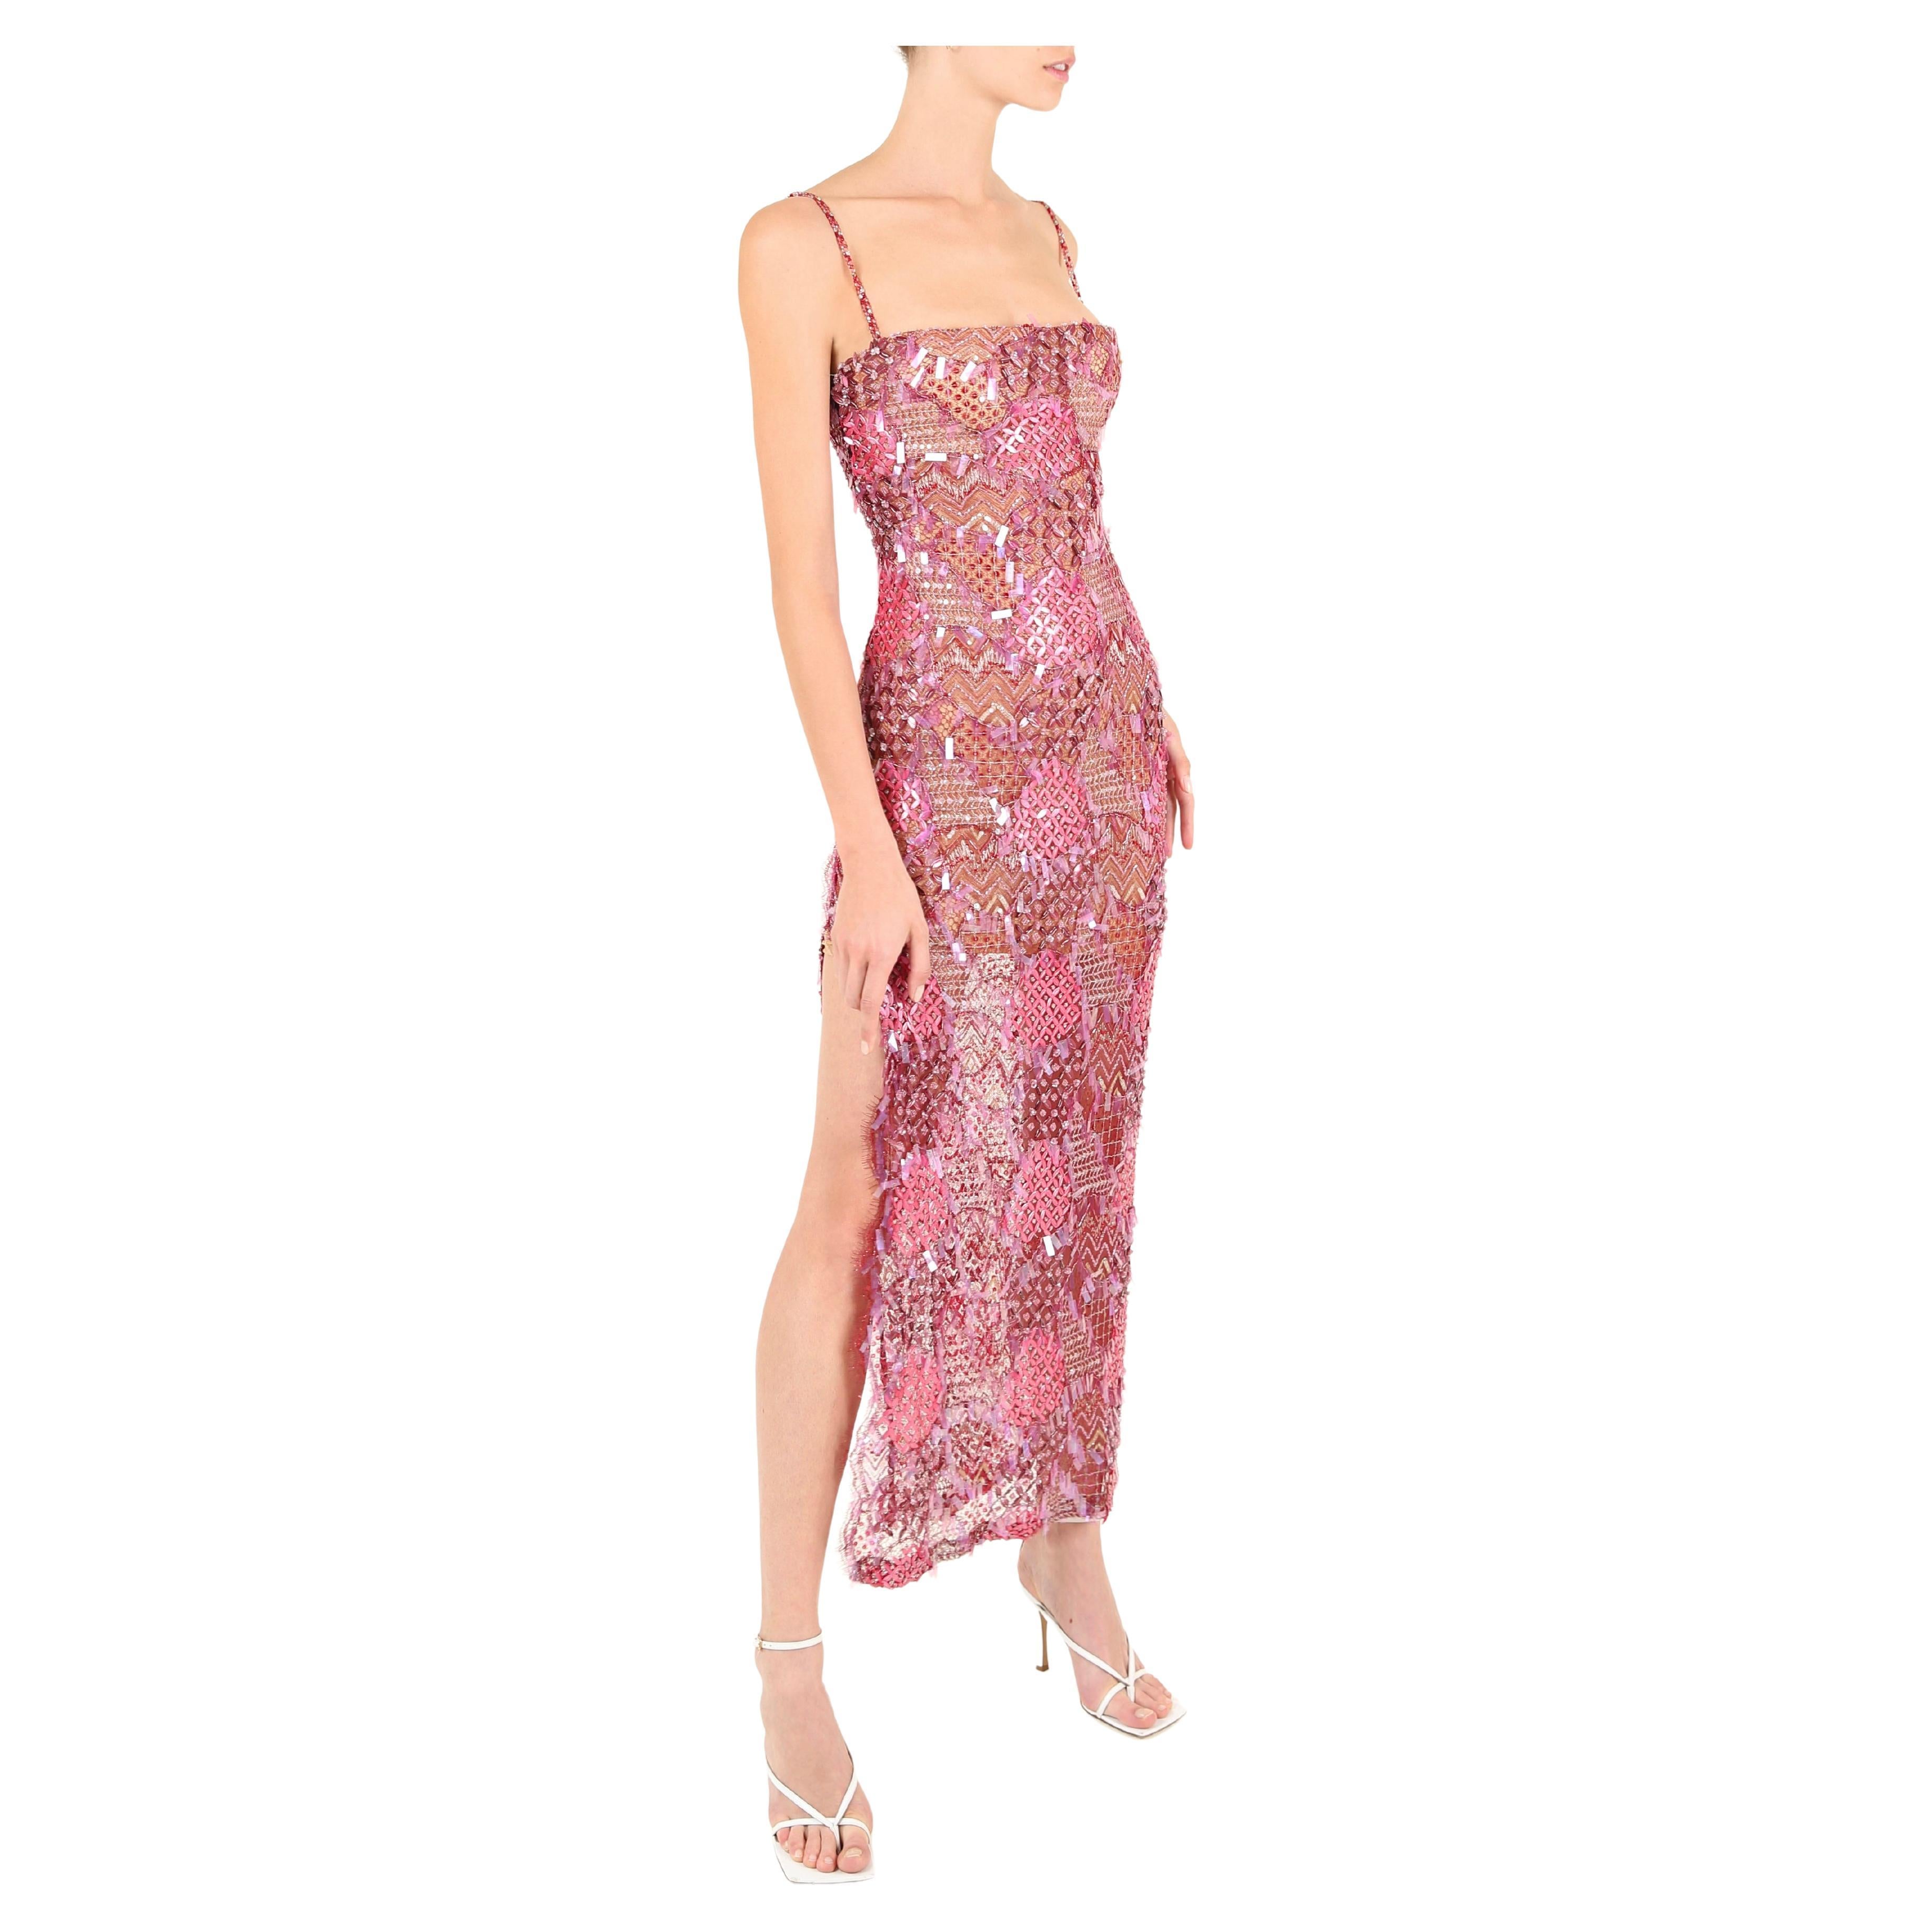 Loris Azzaro couture pink embellished sequin beaded sheer slit bustier dress XS